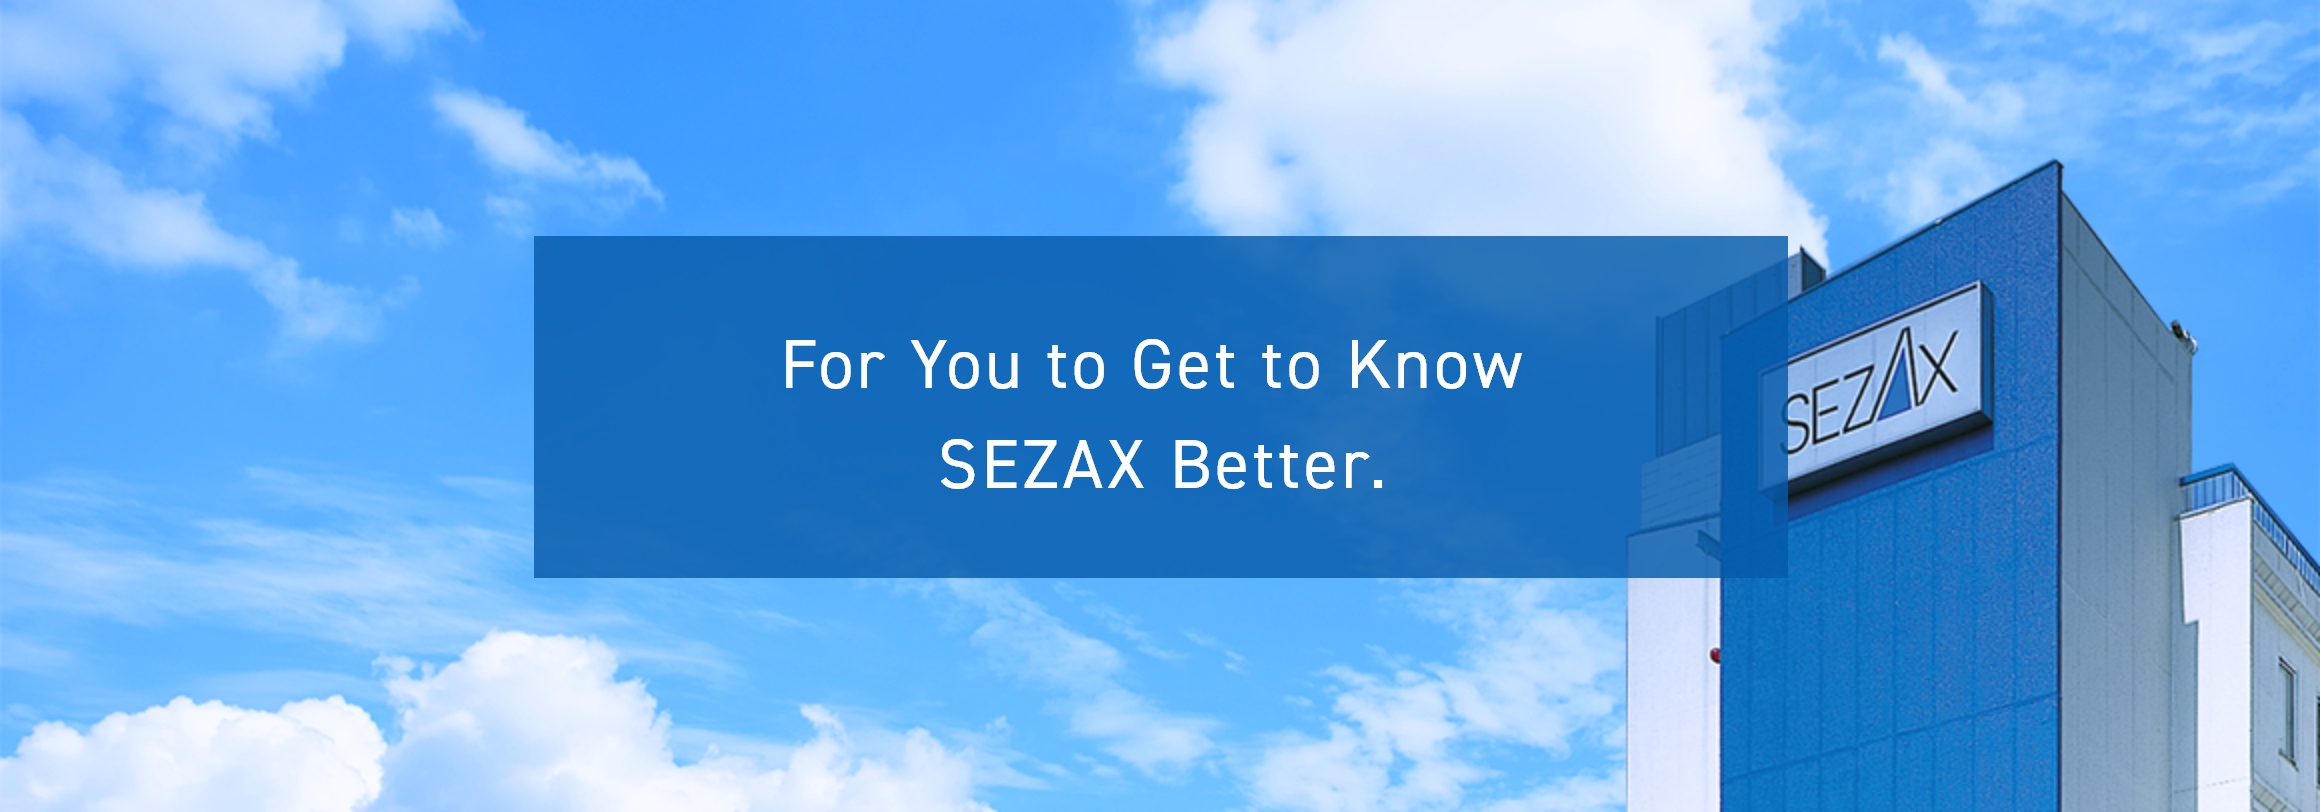 For You to Get to Know SEZAX Better.